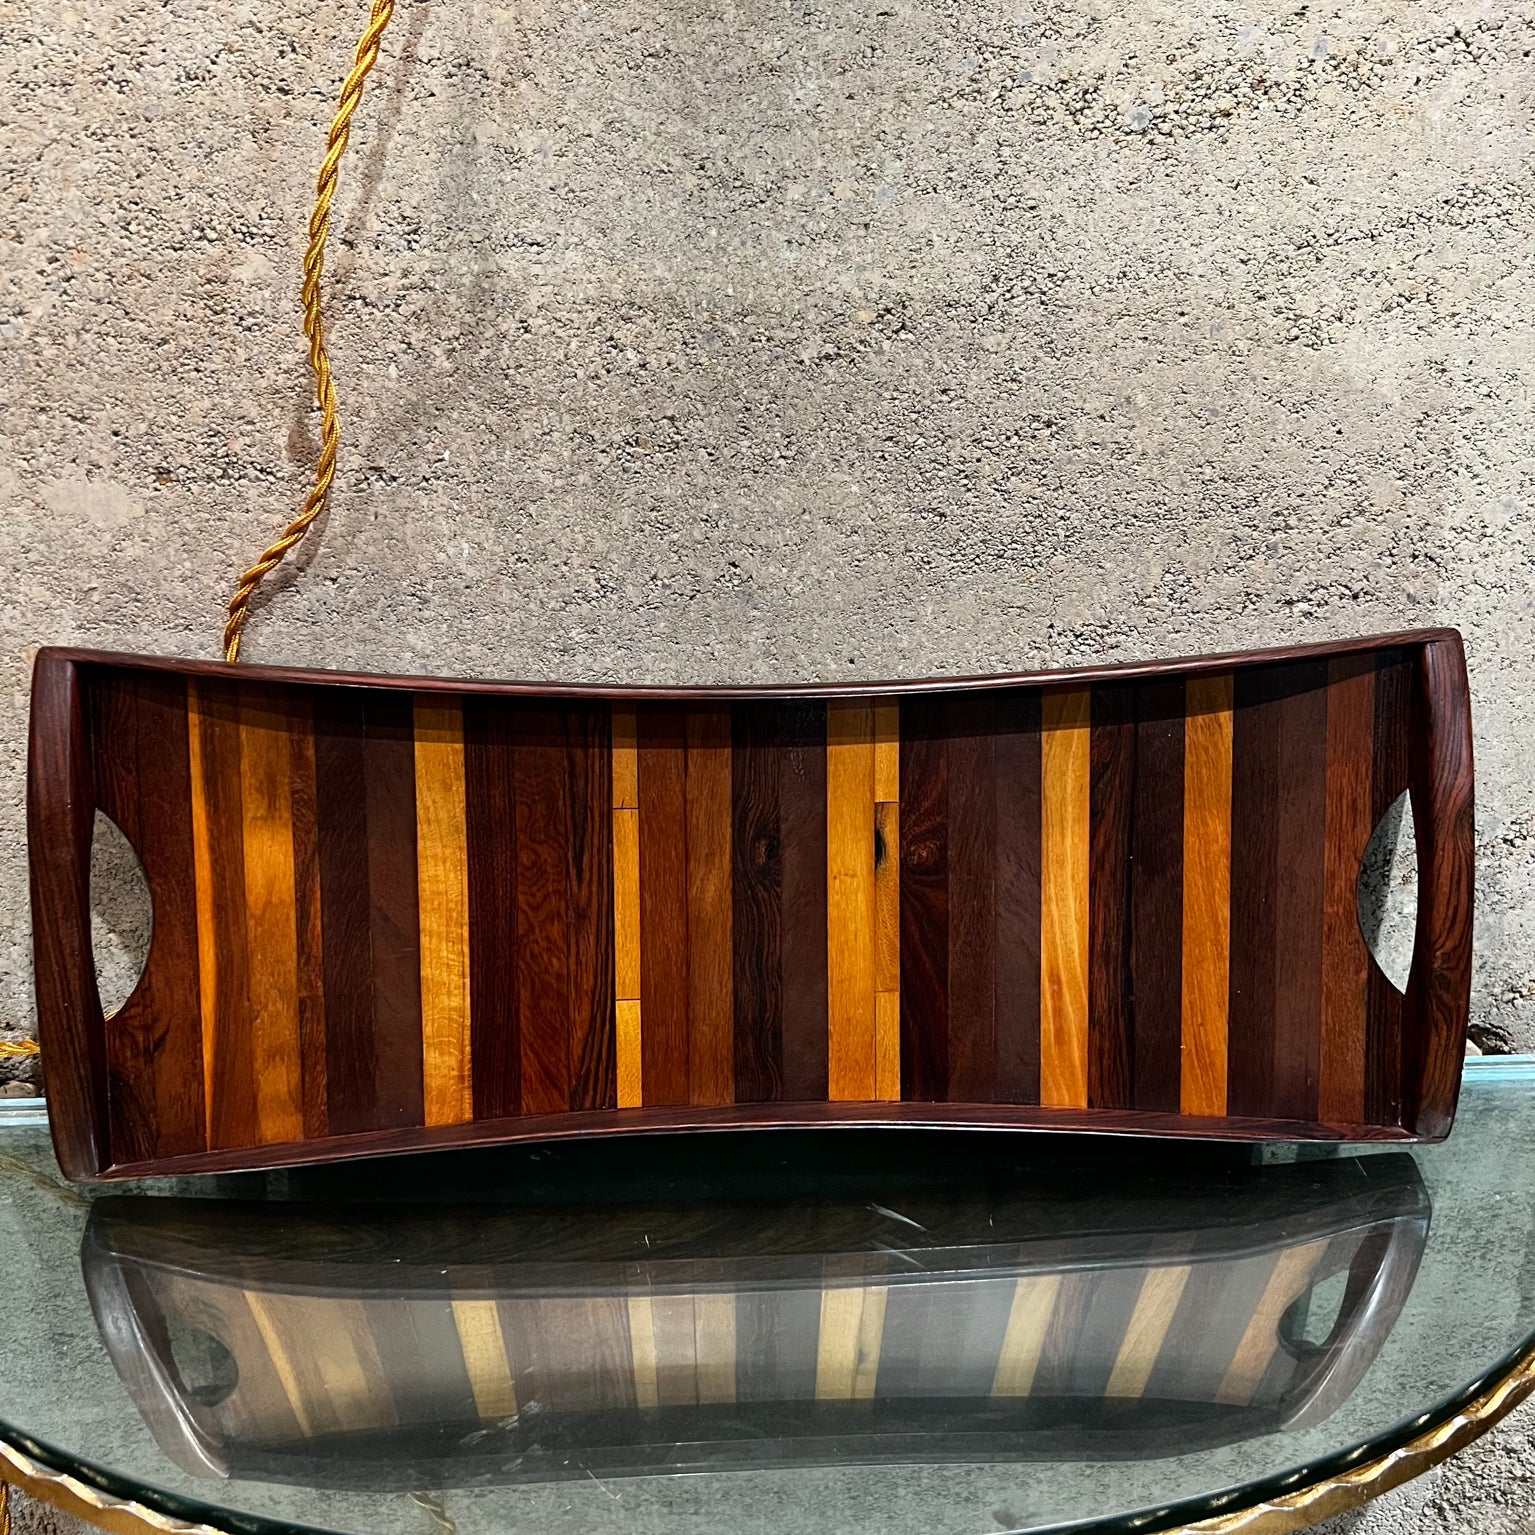 1970s Designed by Don Shoemaker and produced by Señal Mexico 
Midcentury Service Tray medley of exotic woods
Cut out the handle for easy carry.
Tray 8.25 w x 21.75 long x 1.75 d
Discreet mounting hardware is affixed to the back of the